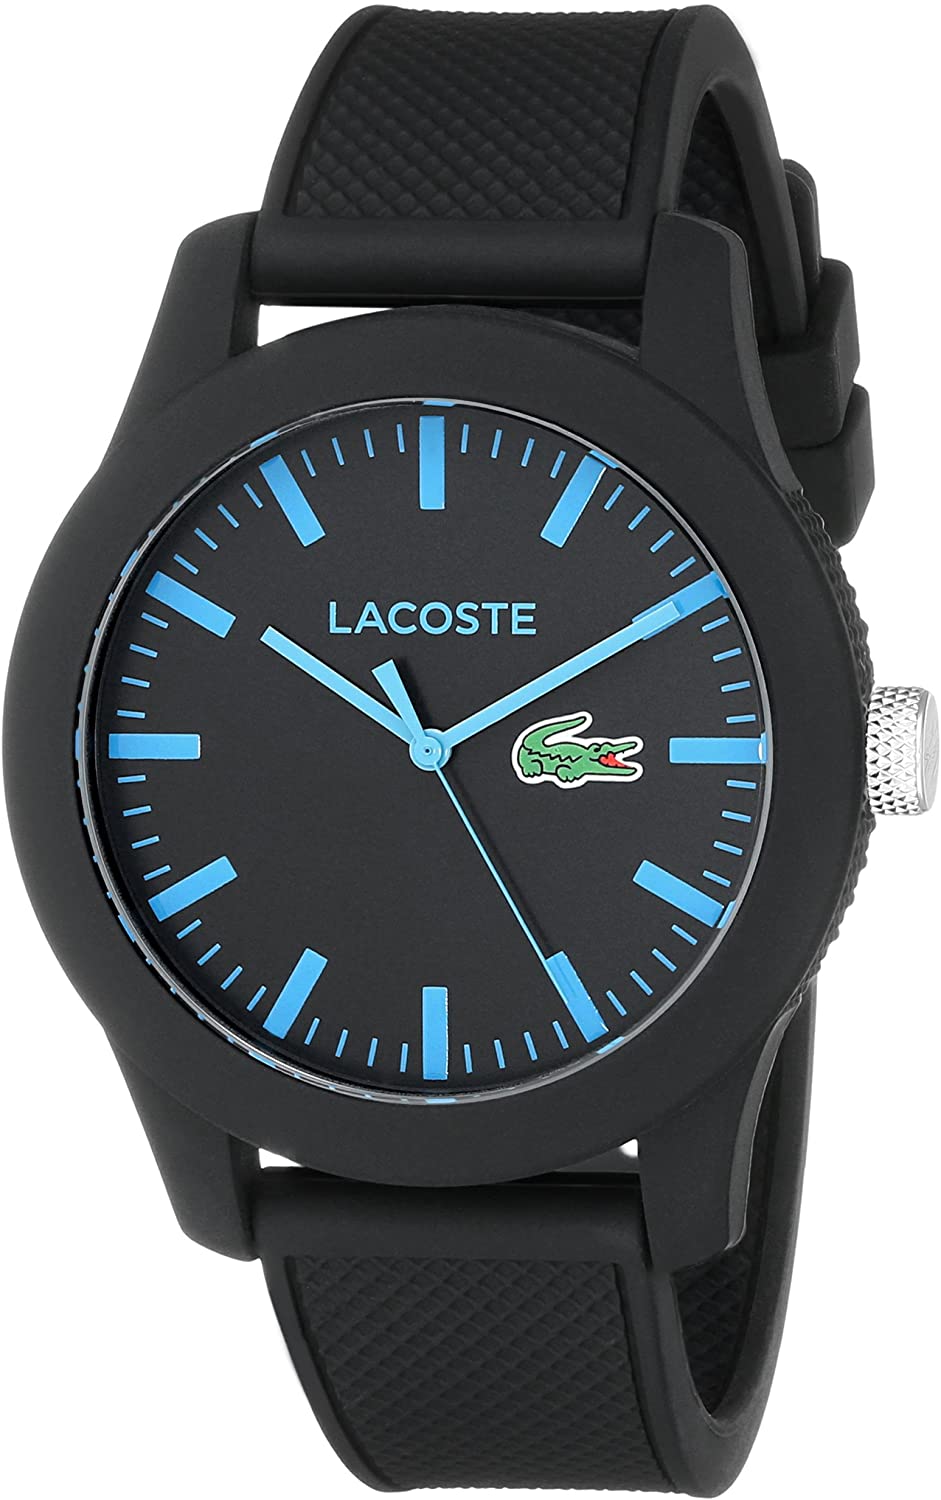 Lacoste Men's 2010791 Lacoste.12.12 Black Watch with Silicone Strap